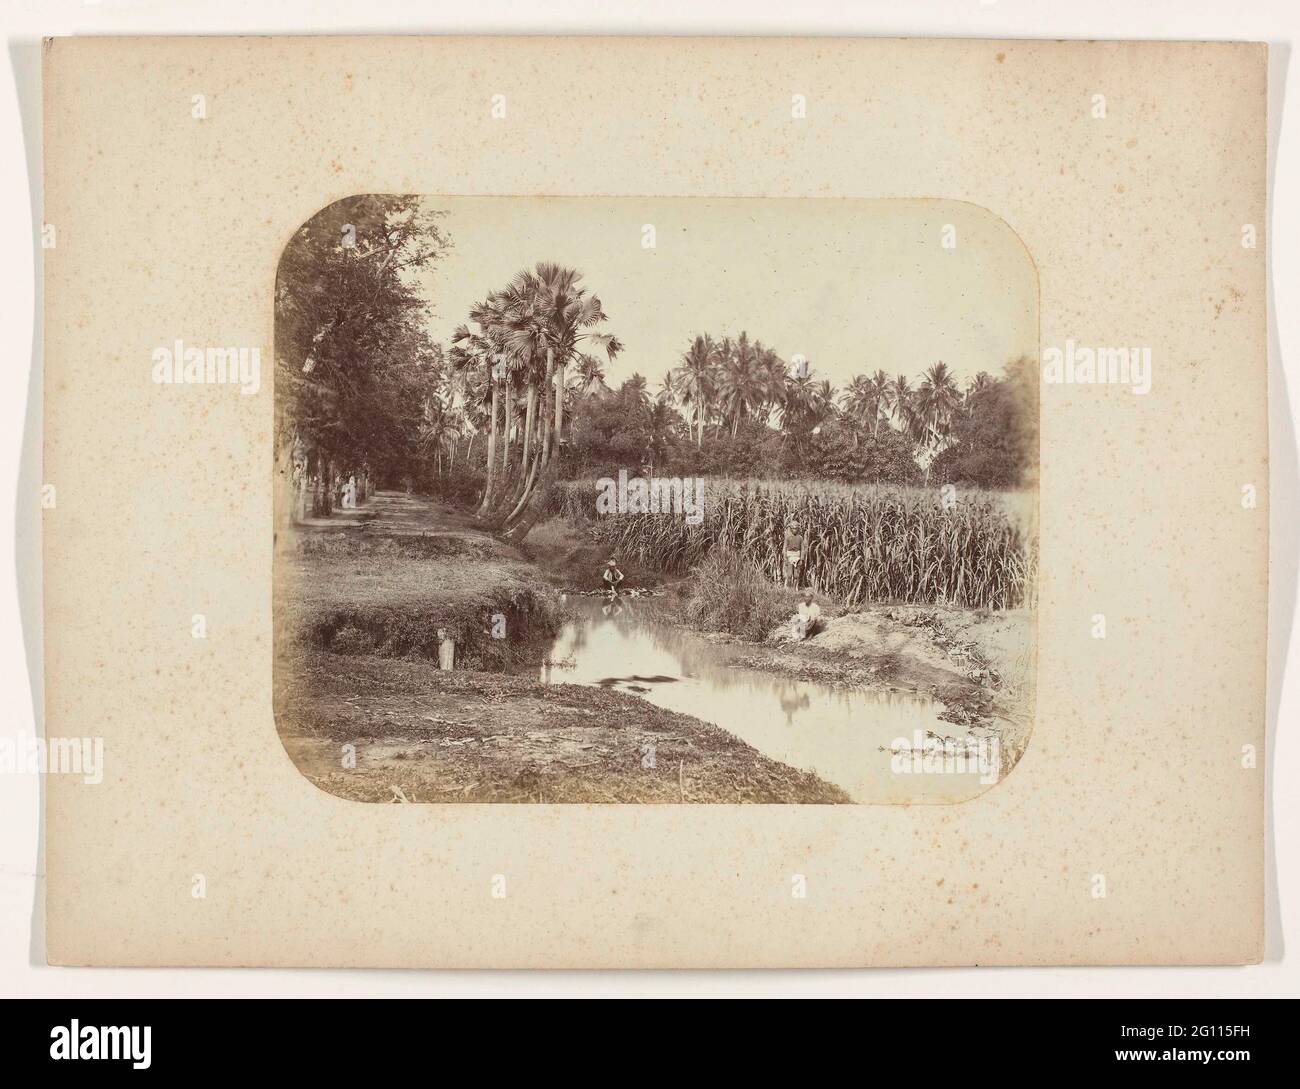 A sugar cane field in bloom. A sugar cane field in bloom with two sitting and one standing inlander. A small stream in the foreground. Part of the photo album by the Surabayasche Vereeniging van Sugar manufacturers offered to Frederik Beyerinck, resident of Surabaya. Stock Photo